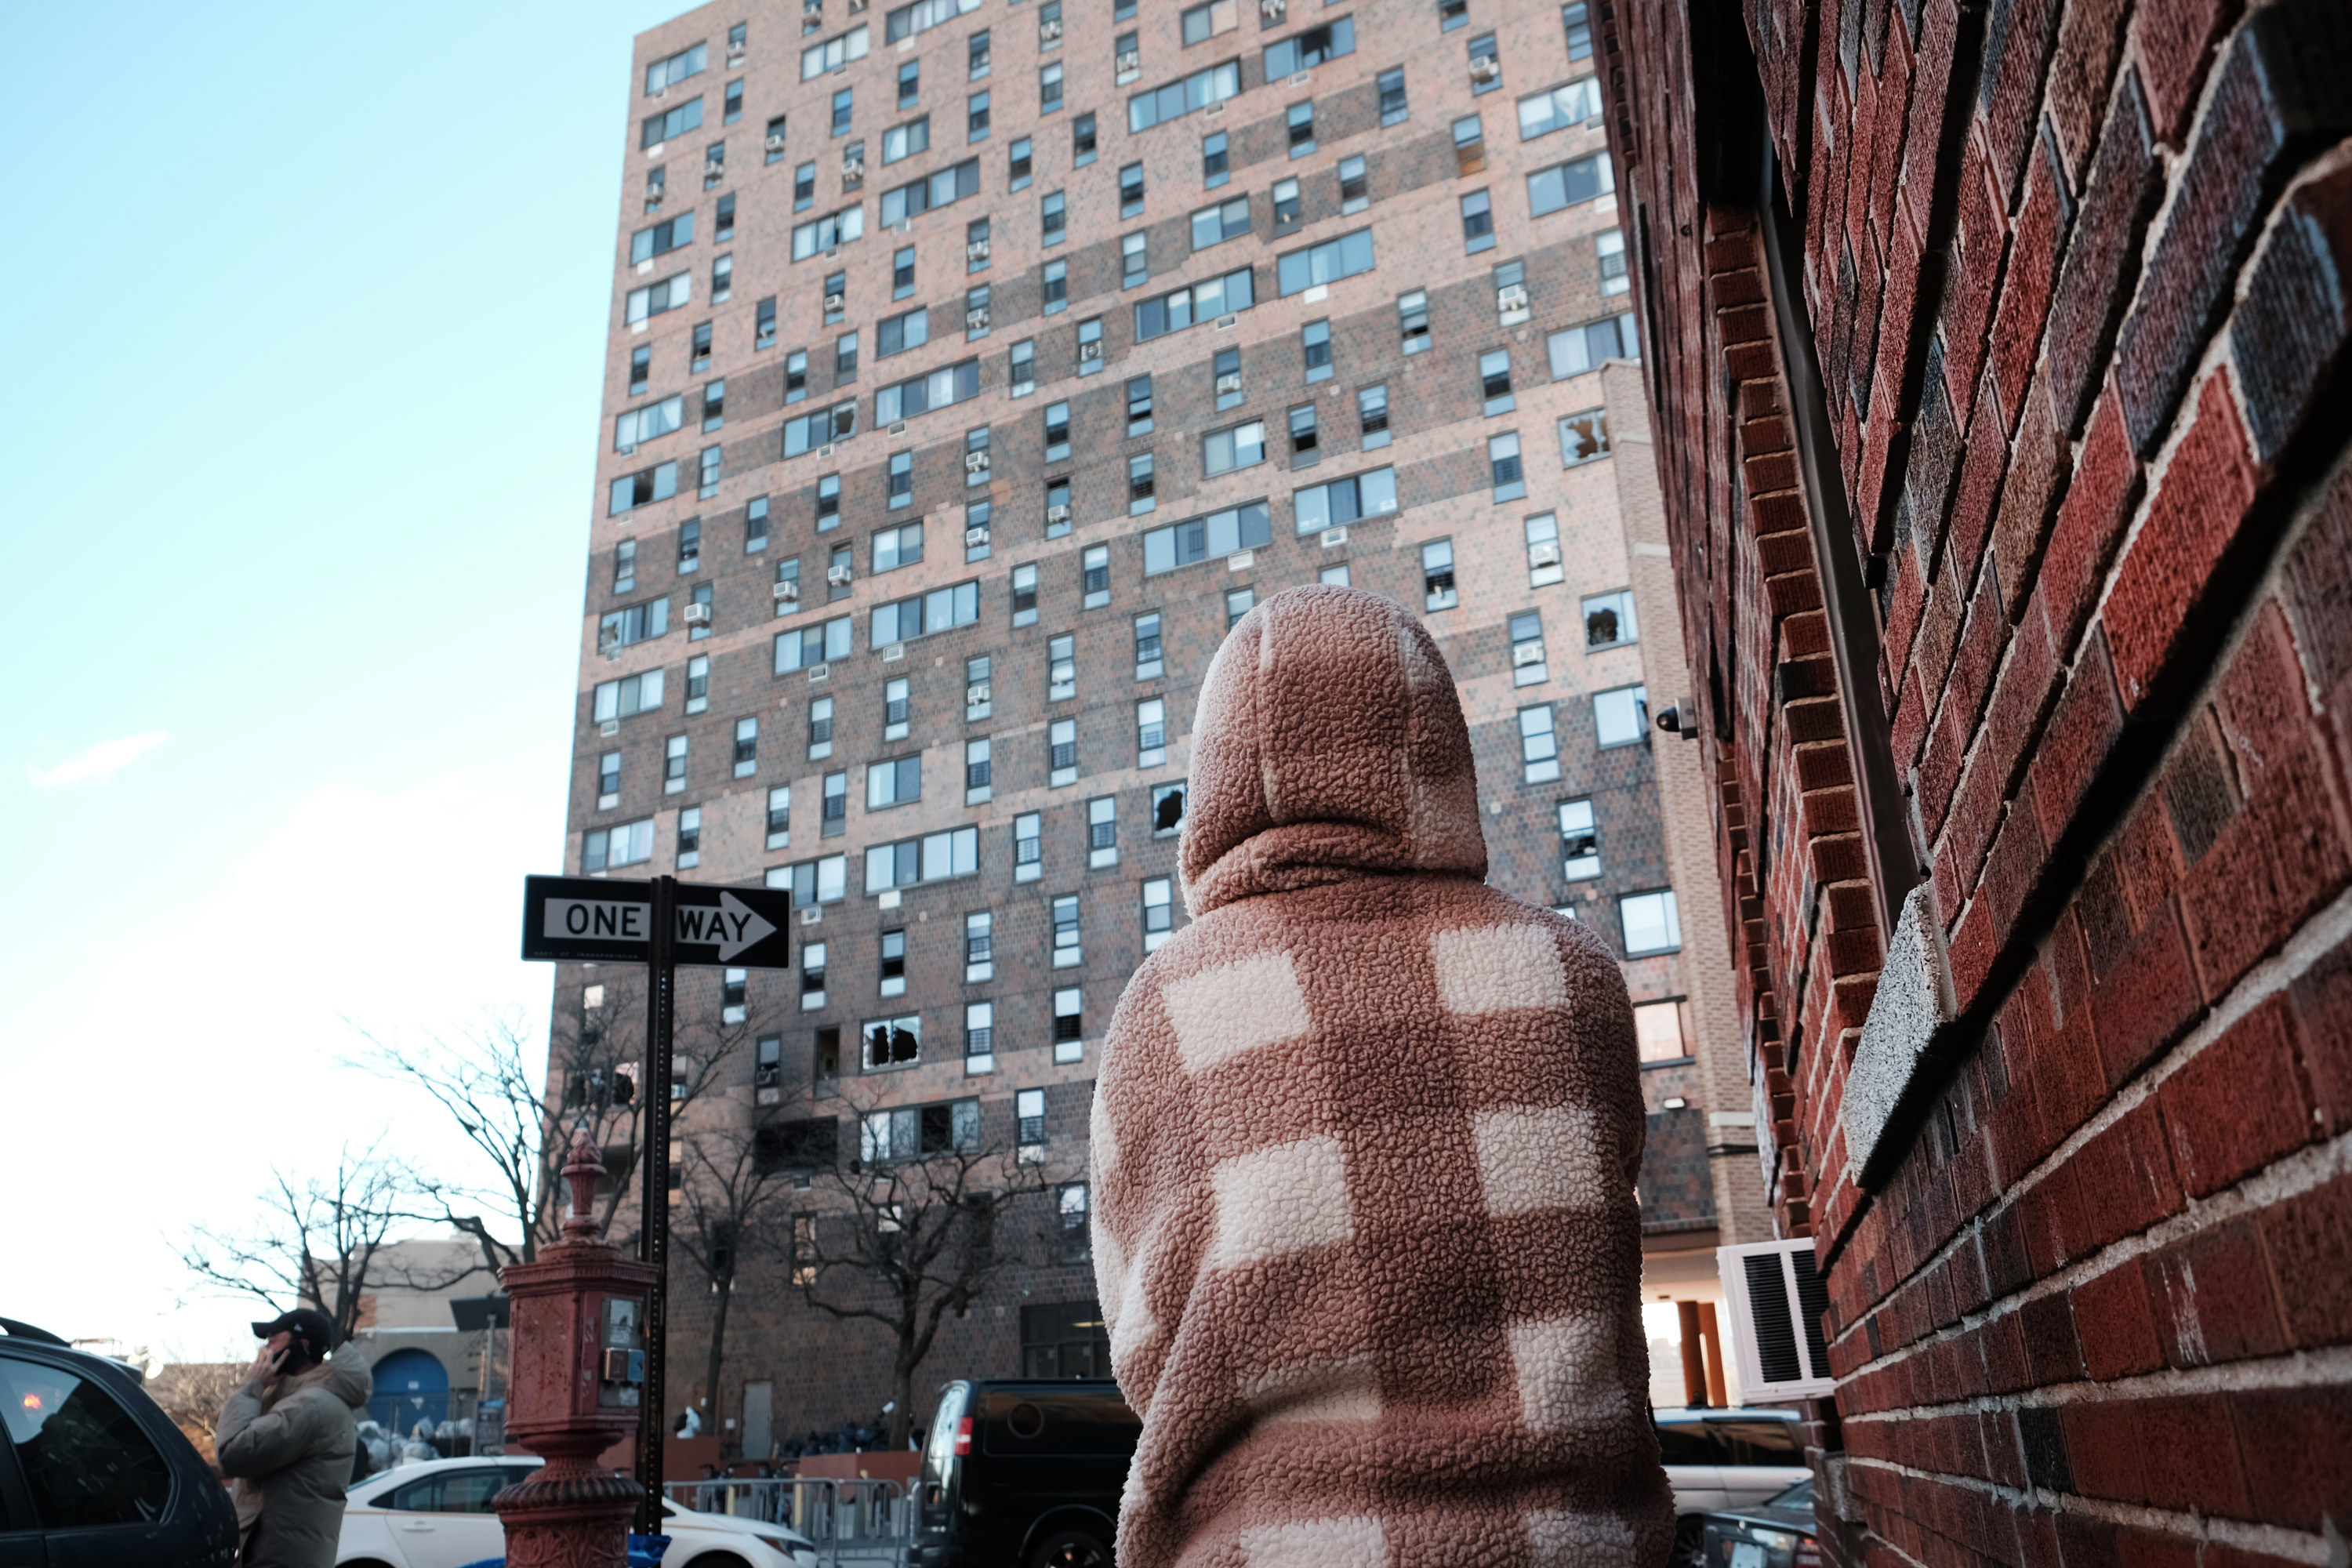 a woman in a fleece hoodie looks at the burned building in a bronx, a one way sign in the background 